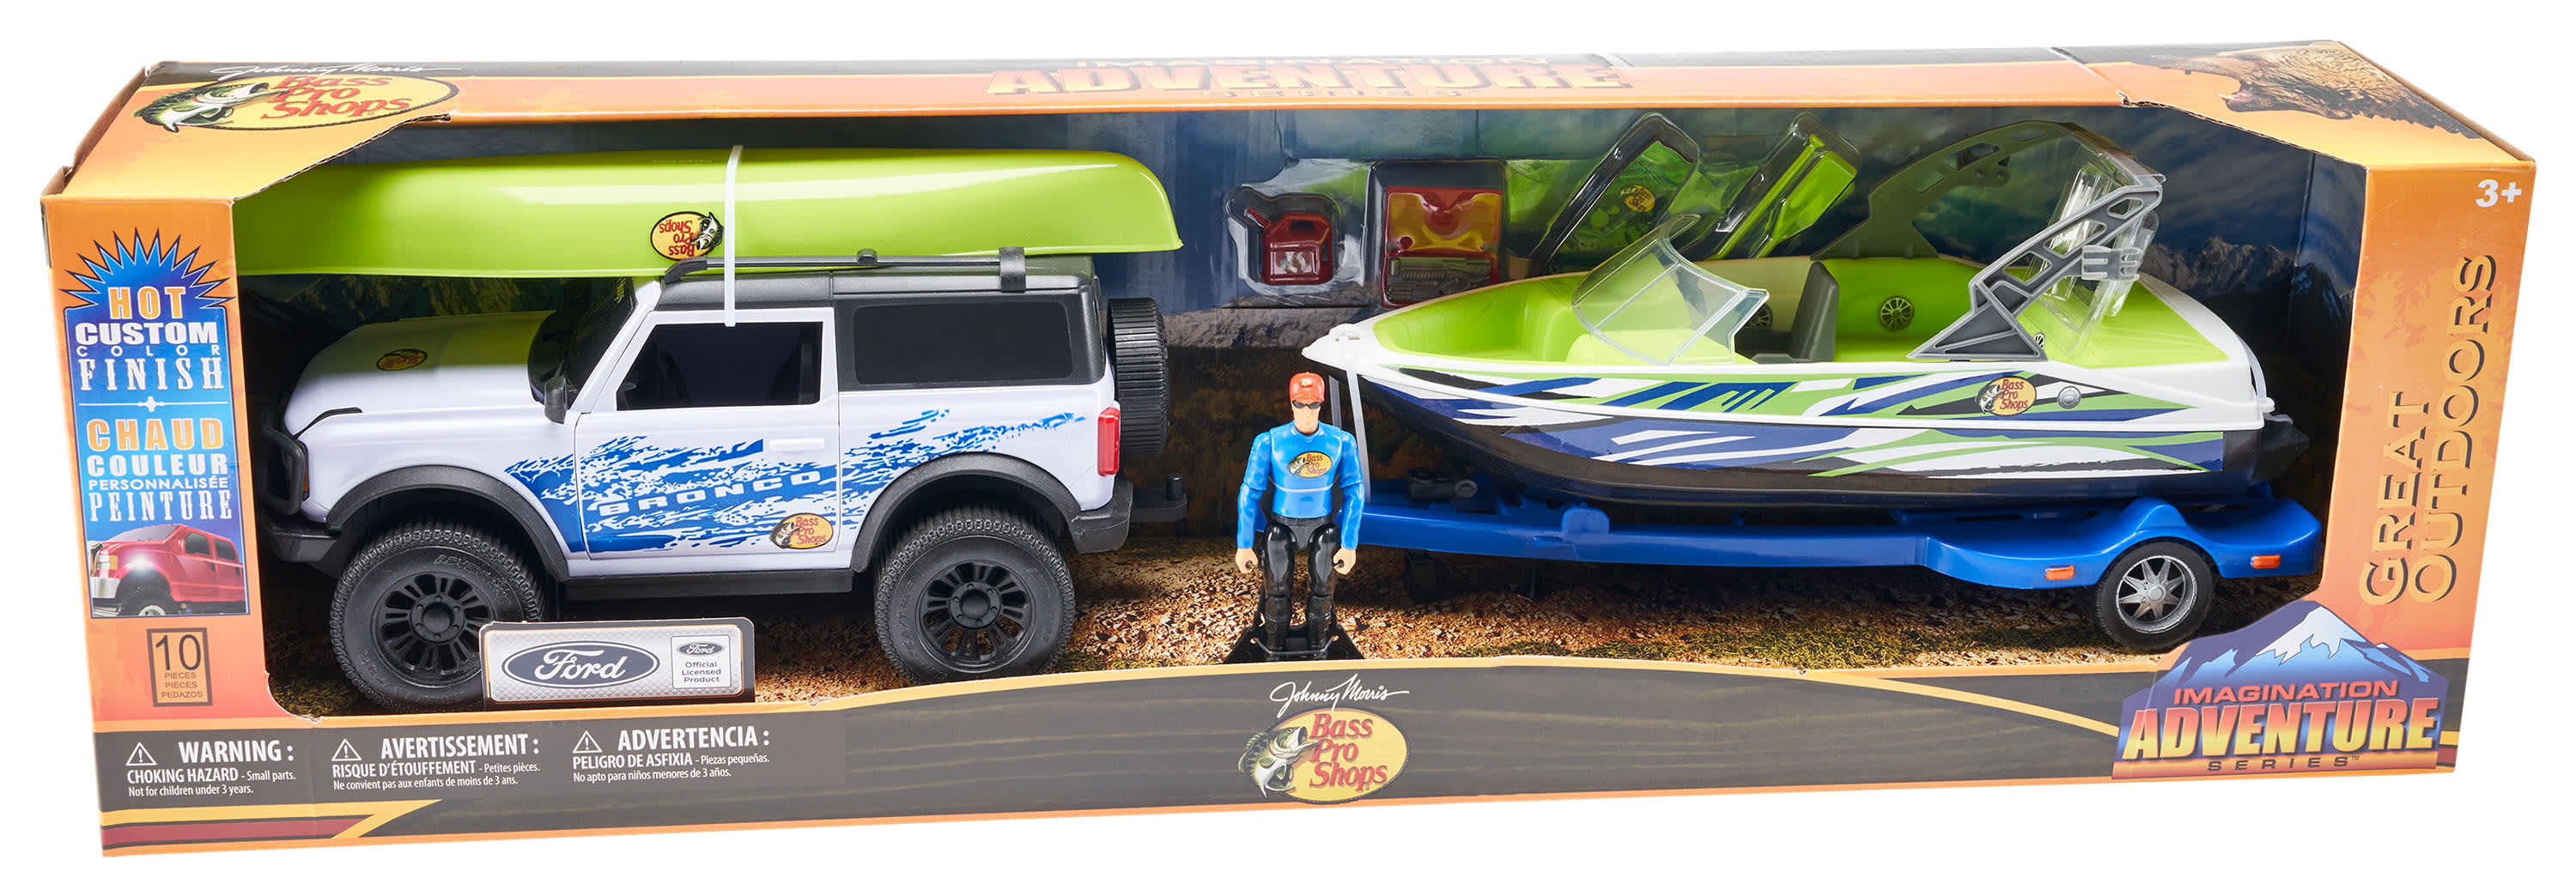 Bass Pro Shops Deluxe Ford Bronco Wake Boat Adventure Playset for